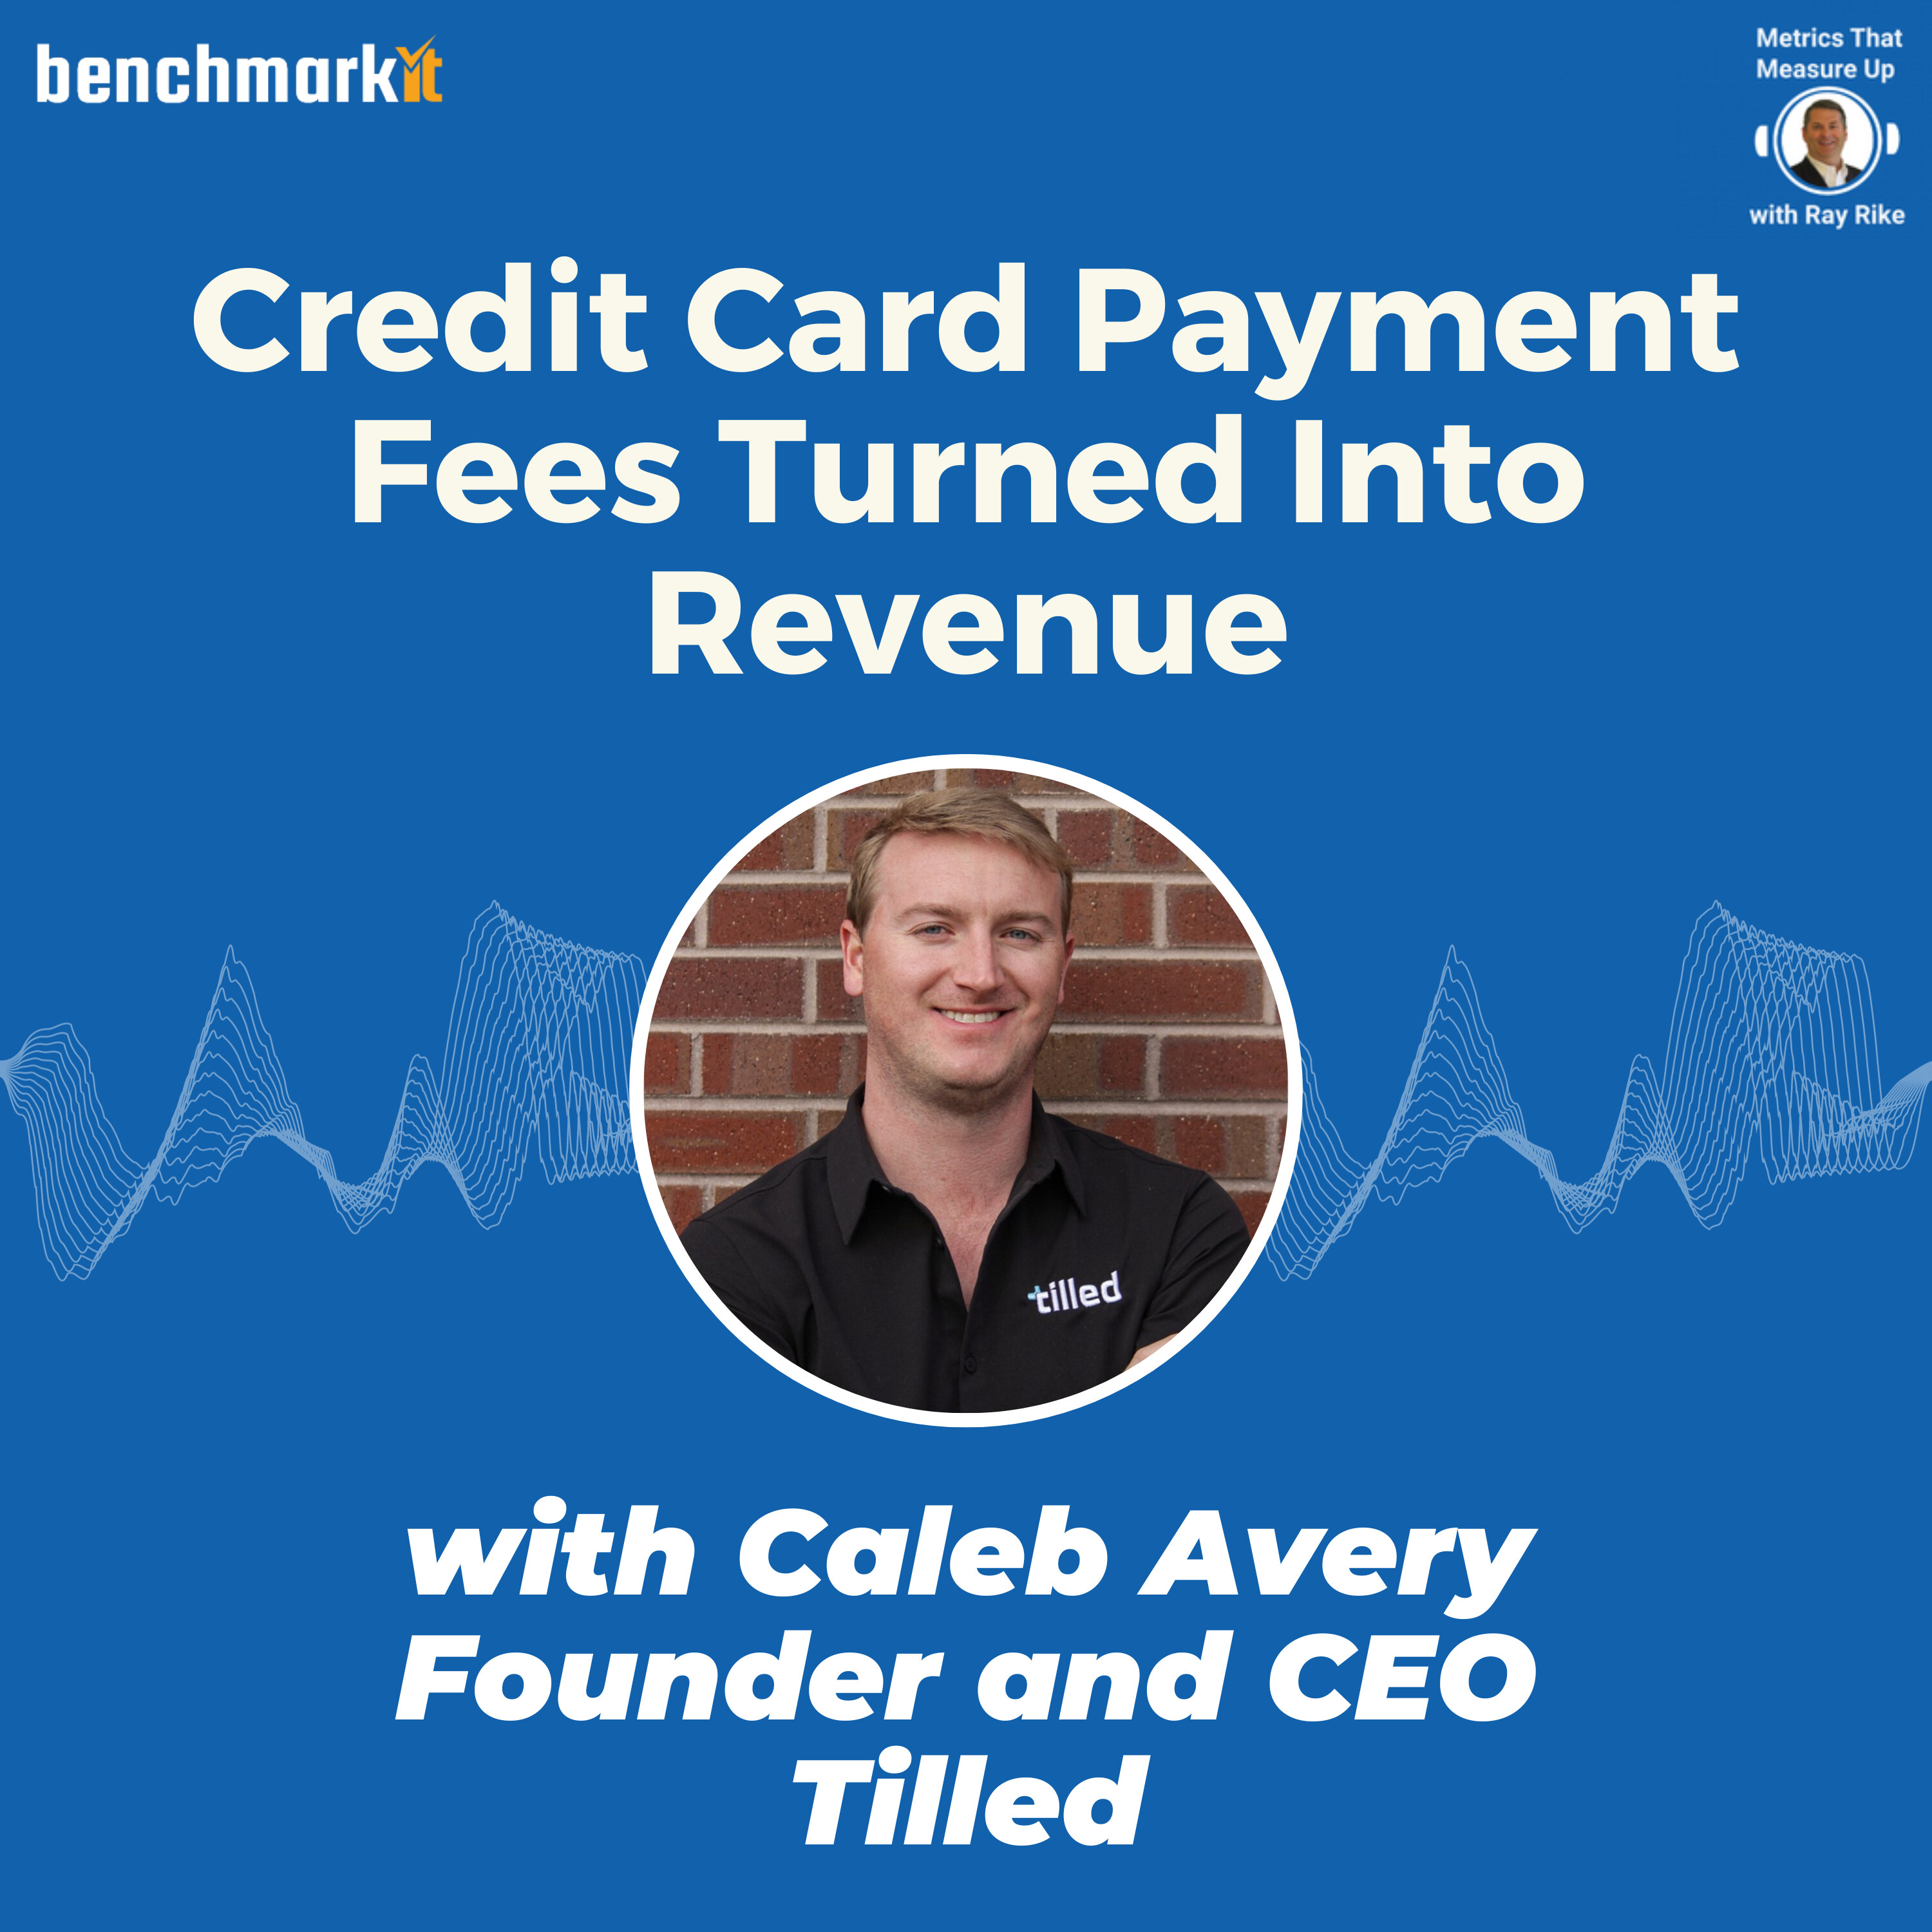 Turning Credit Card Payment Processing Fees into Revenue - with Caleb Avery, Founder and CEO Tilled